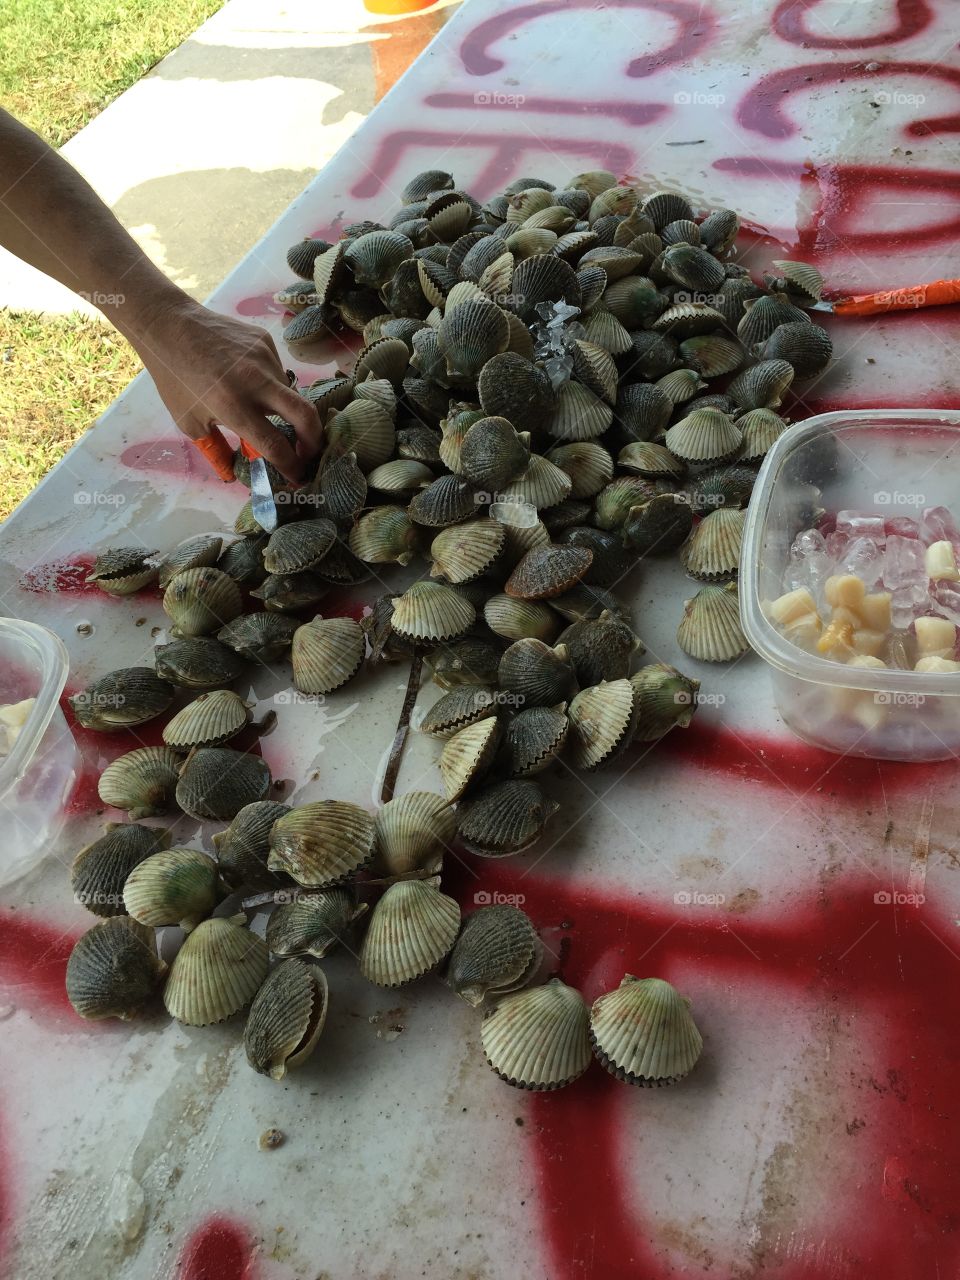 Scallops from Crystal River. Scalloping in Crystal River FL